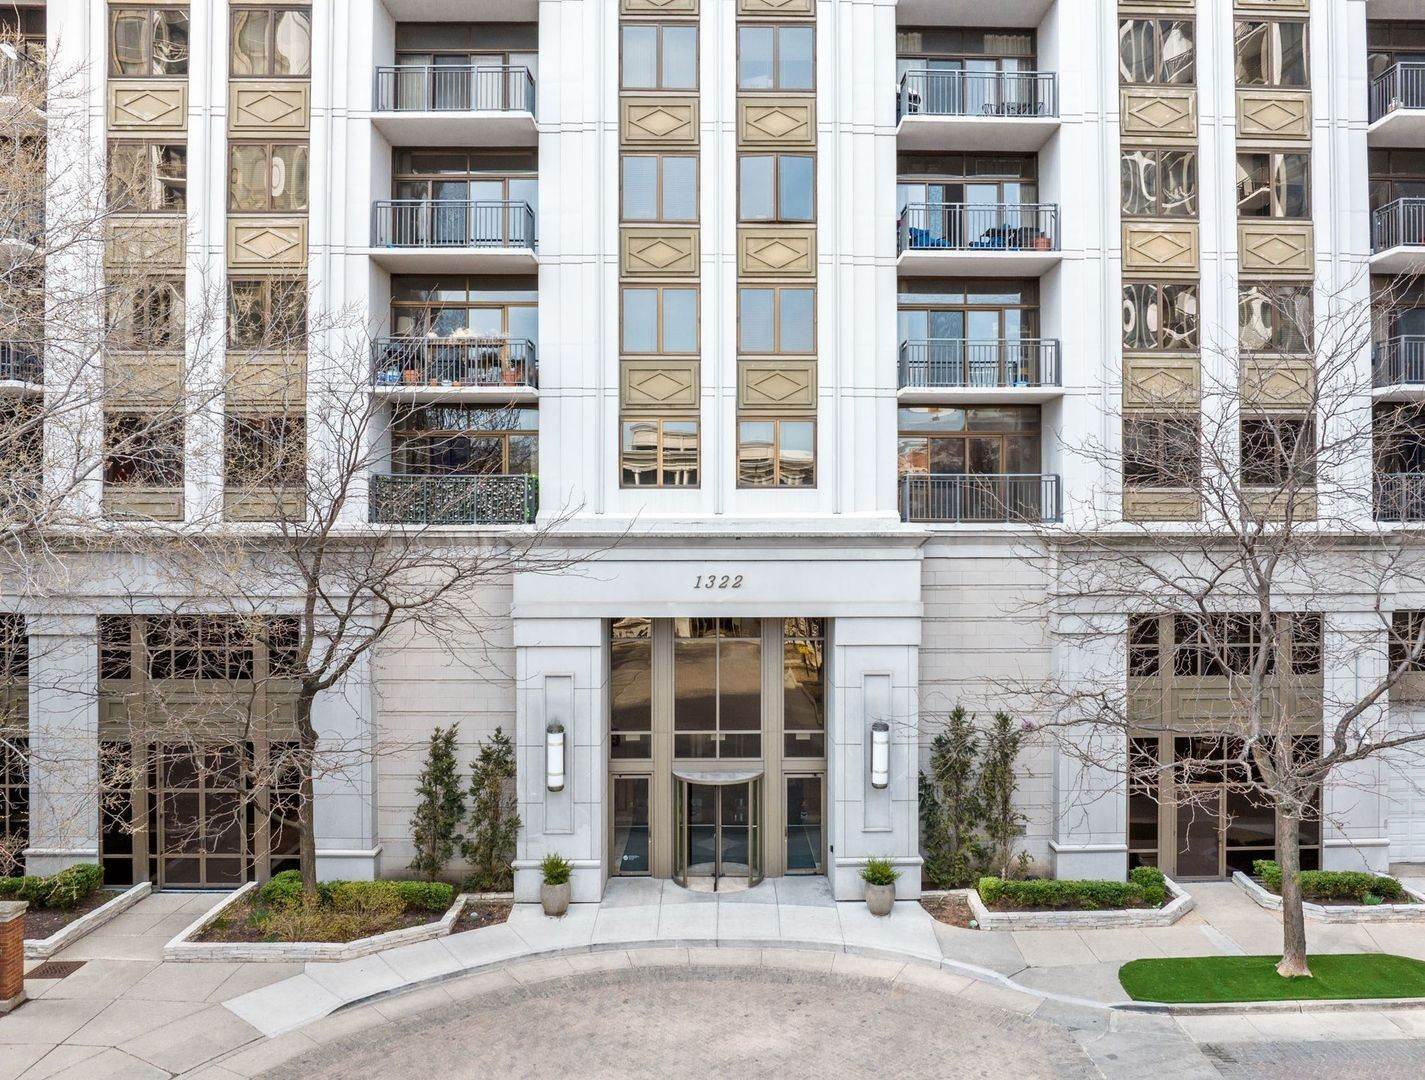 Single Family for Sale at Central Station, Chicago, IL 60605